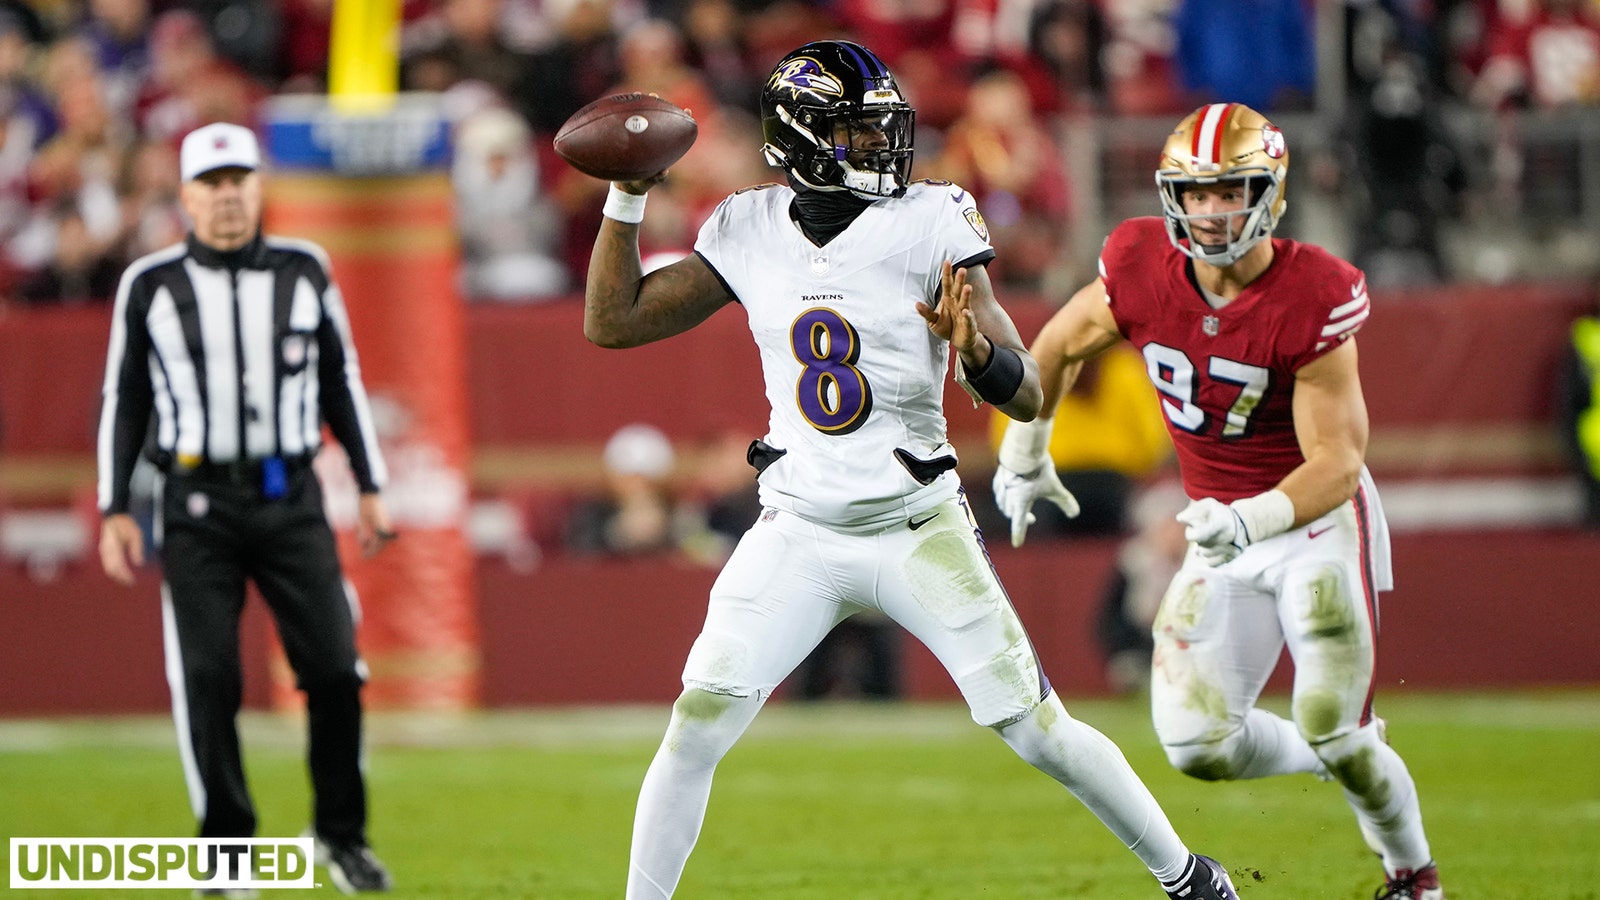 Ravens handle 49ers On Monday Night Football – Undipusted crew reacts